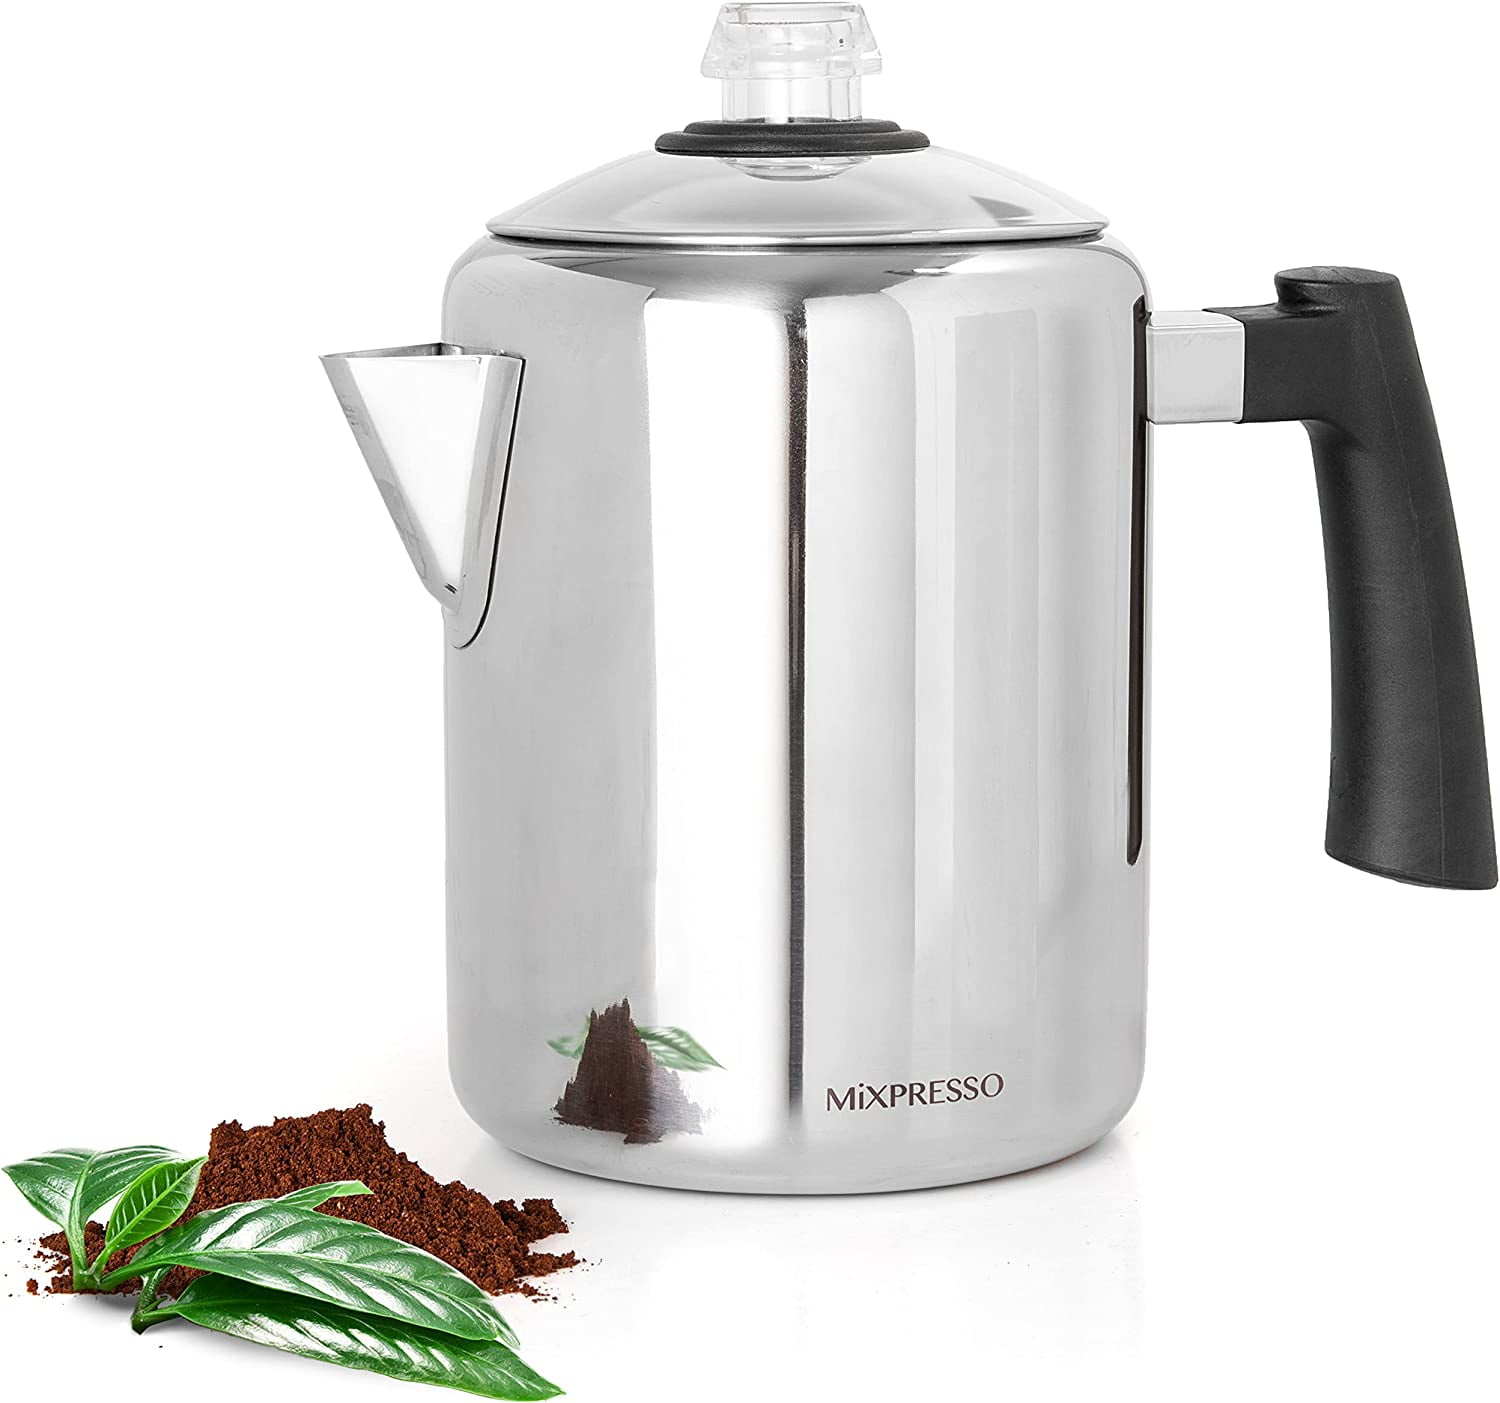 2-6 cup Stovetop Coffee Percolator - Whisk